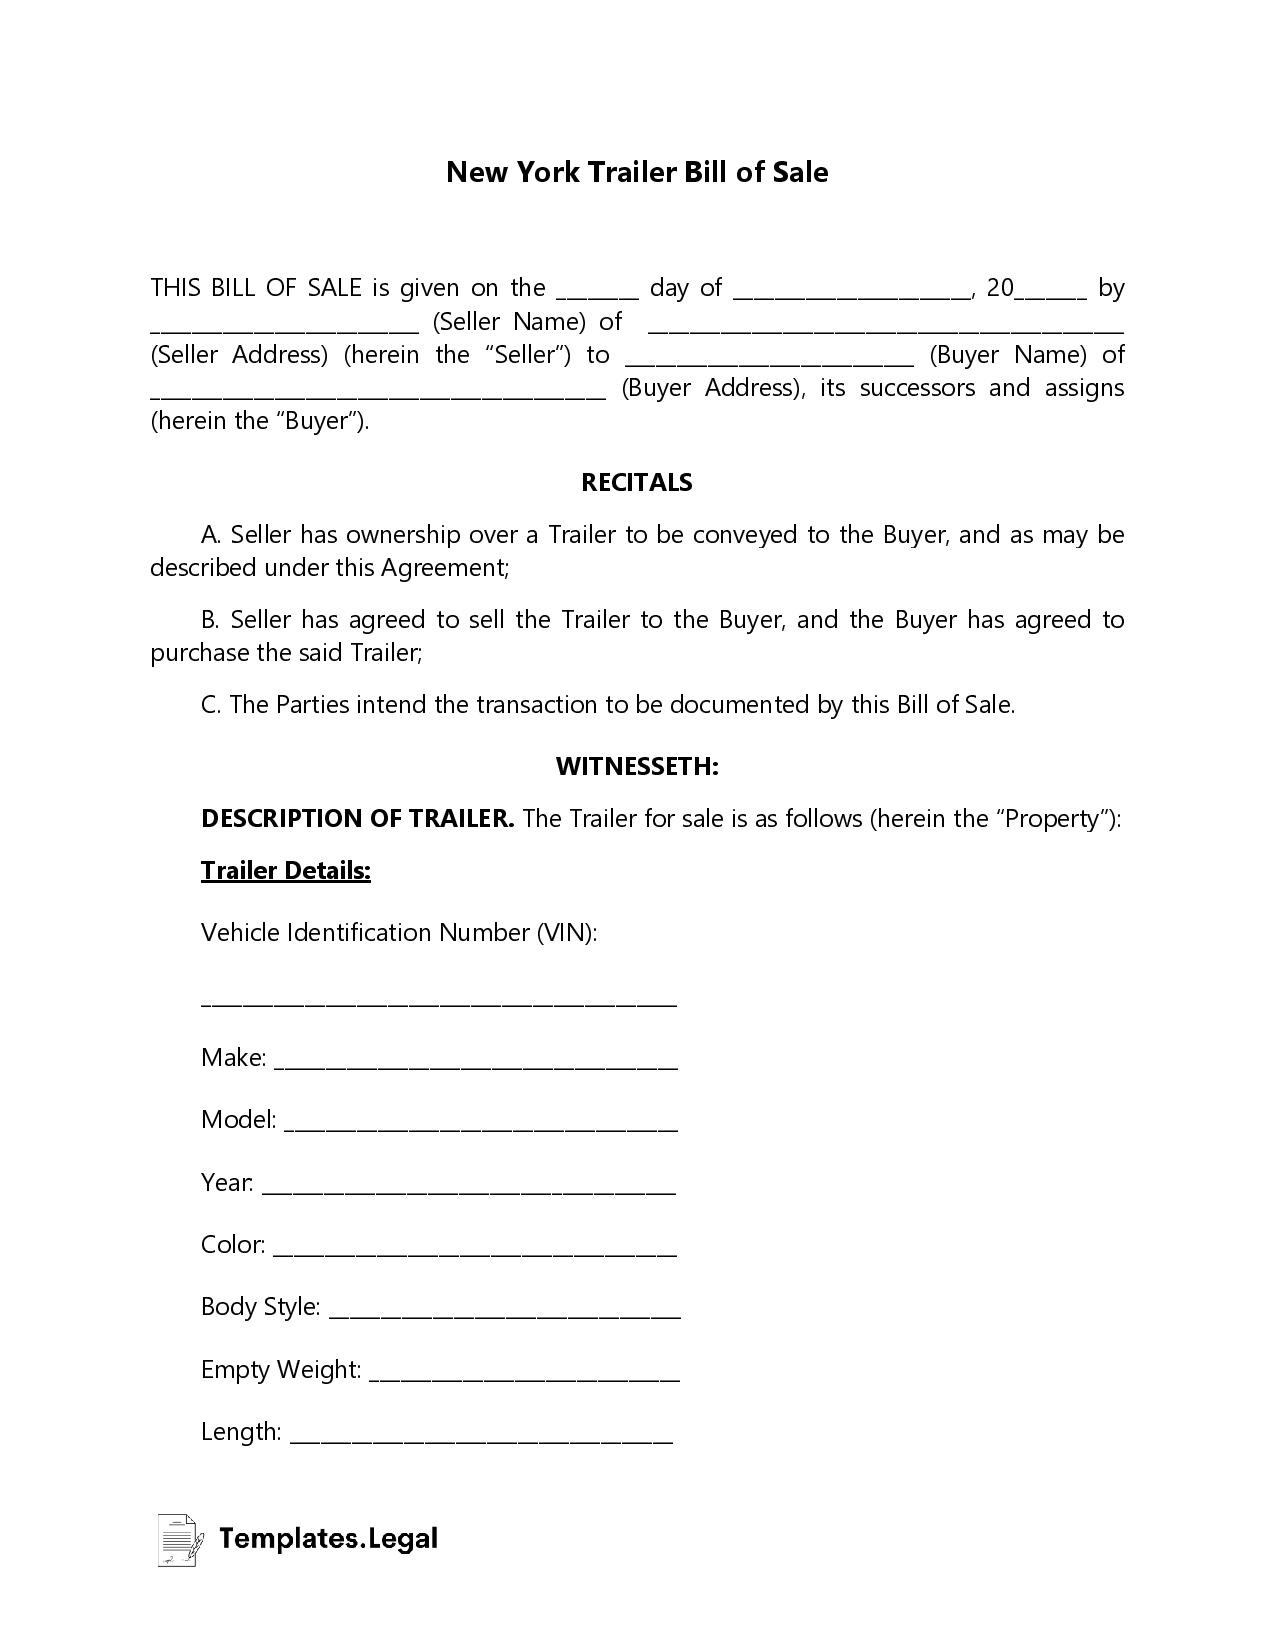 New York Trailer Bill of Sale - Templates.Legal